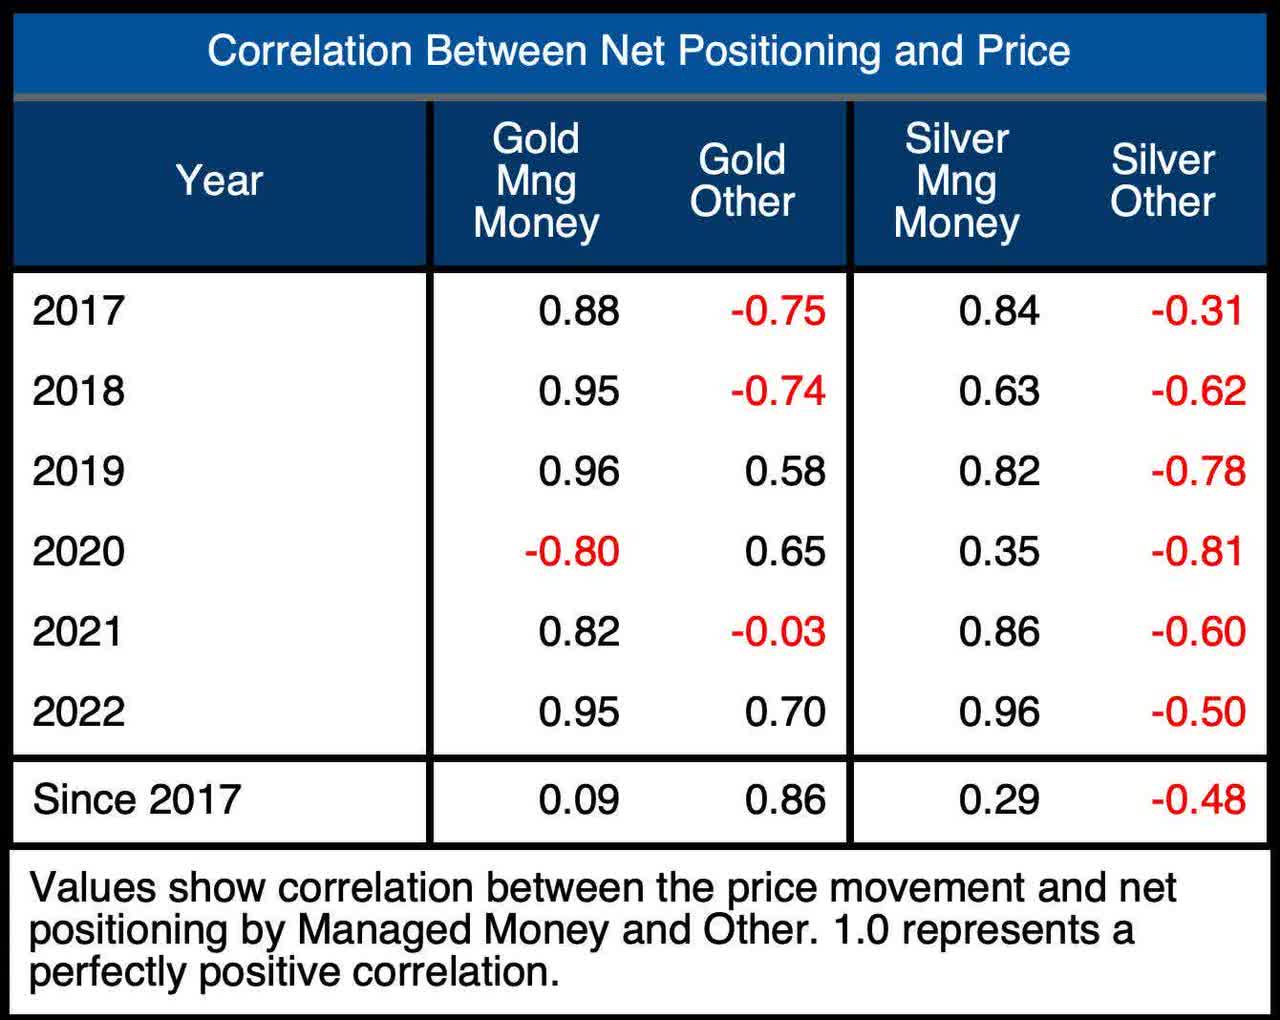 Correlation Between Net Positioning and Price - Gold and Silver